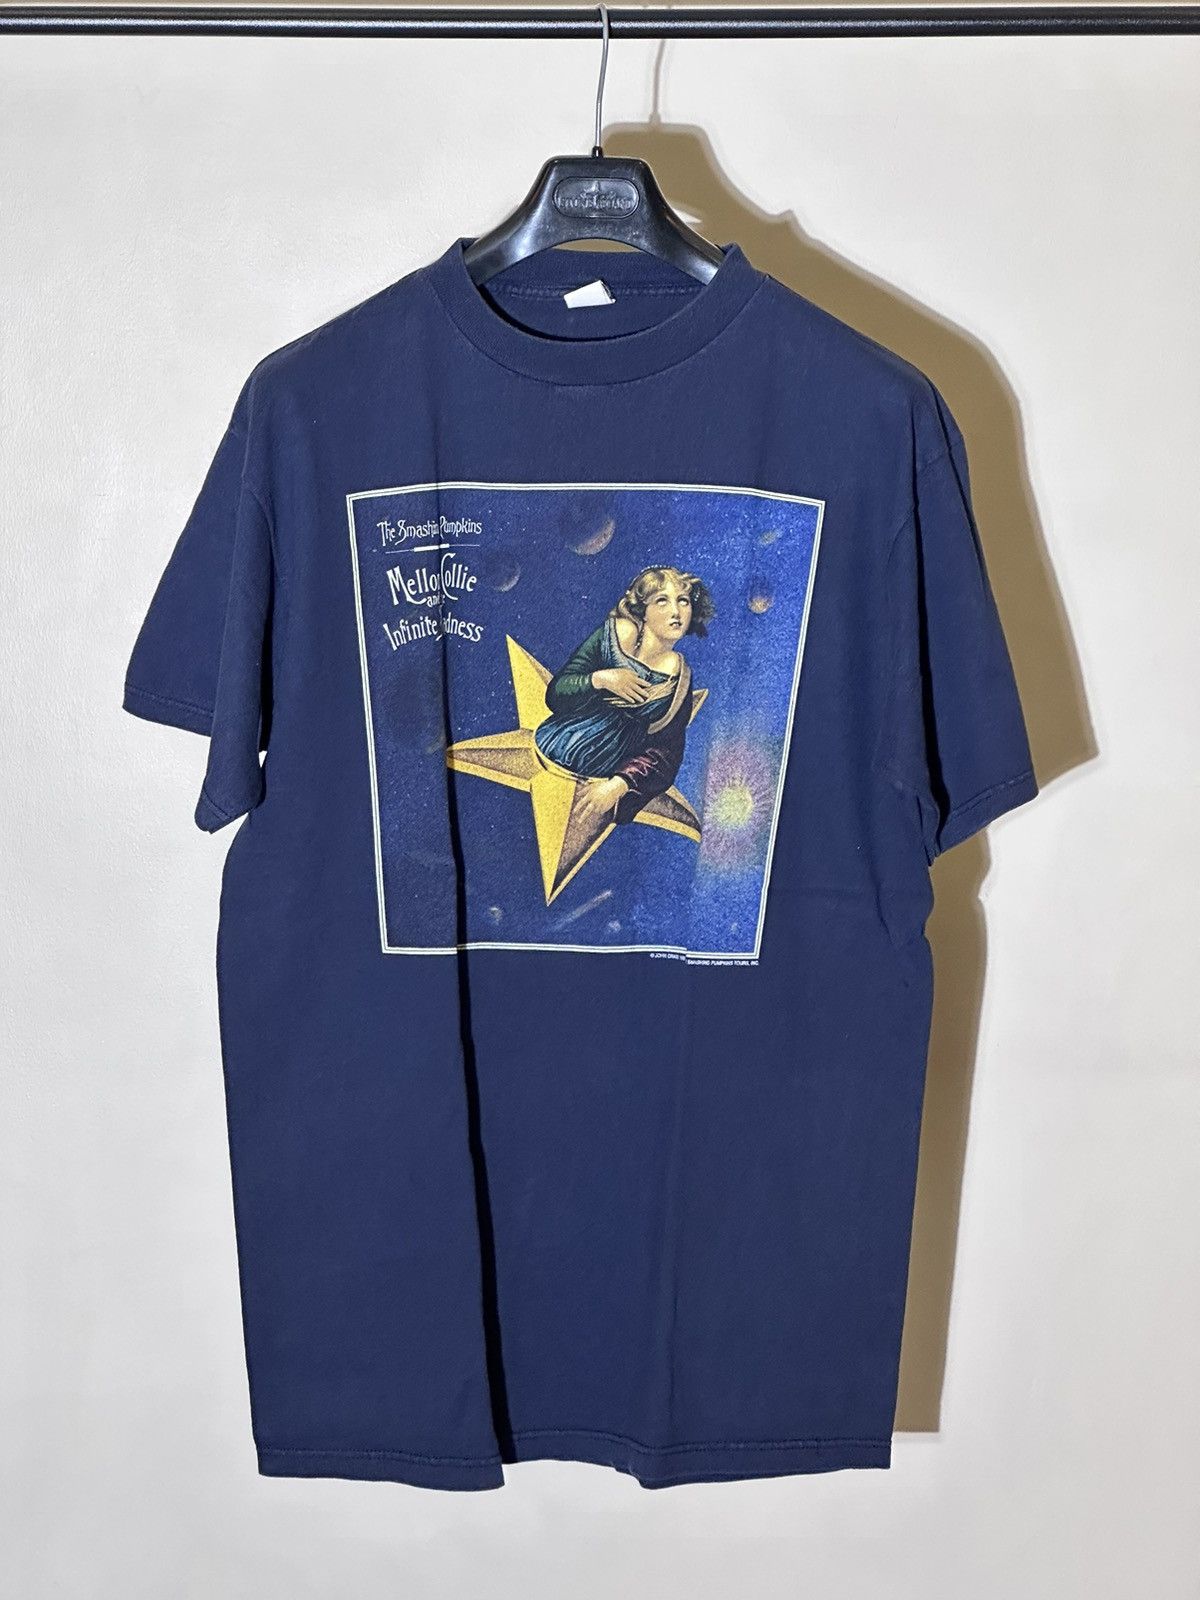 Pre-owned Band Tees X Vintage 1995 Smashing Pumpkins Mellon Collie T-shirt In Navy